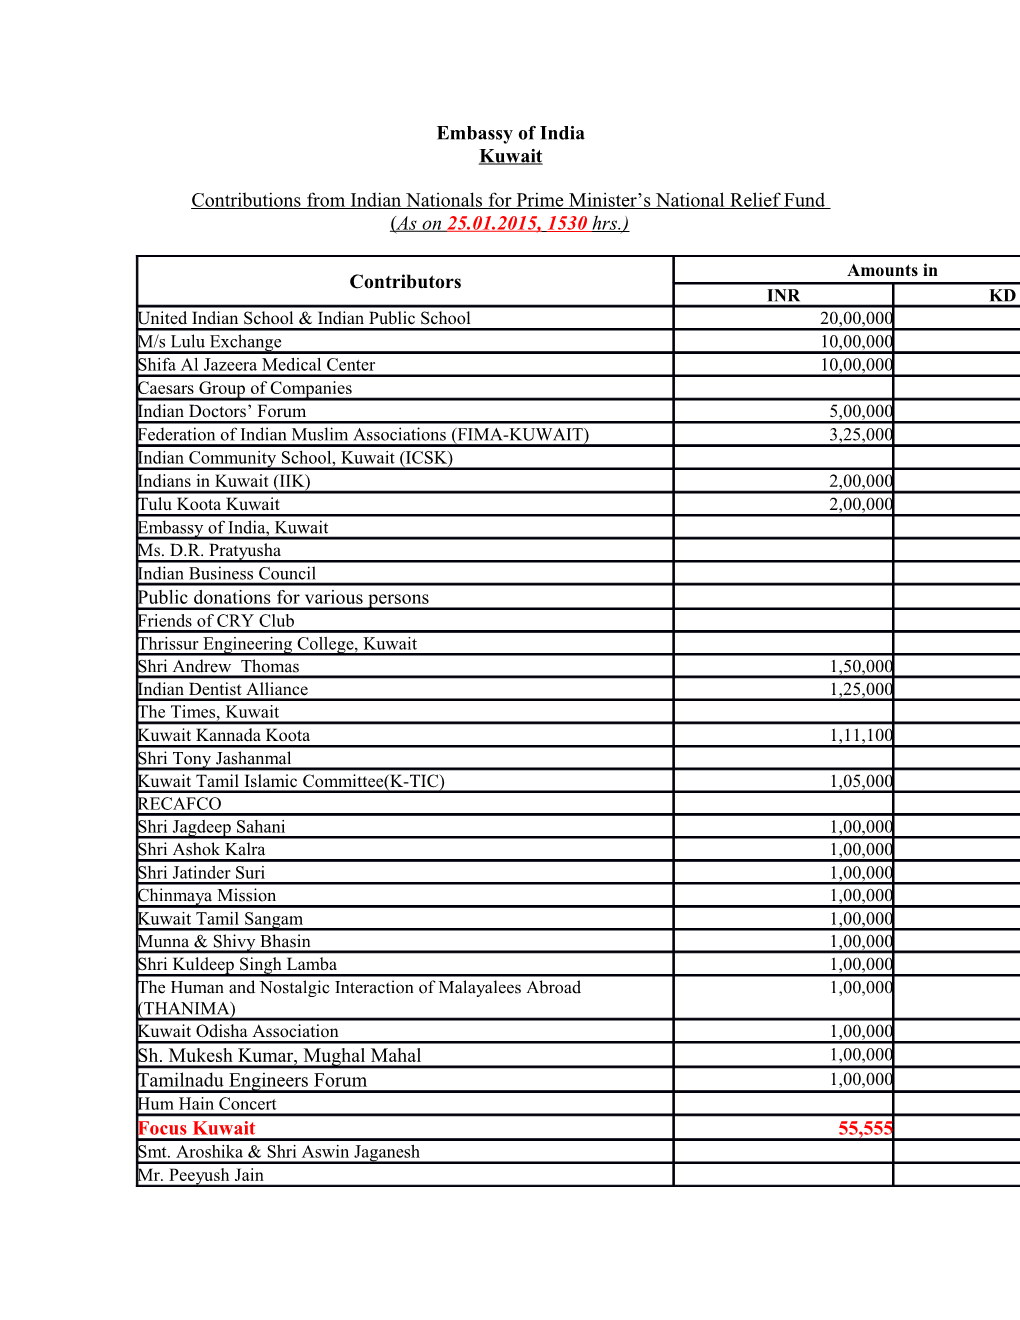 Contributions from Indian Nationals for Prime Minister S National Relief Fund